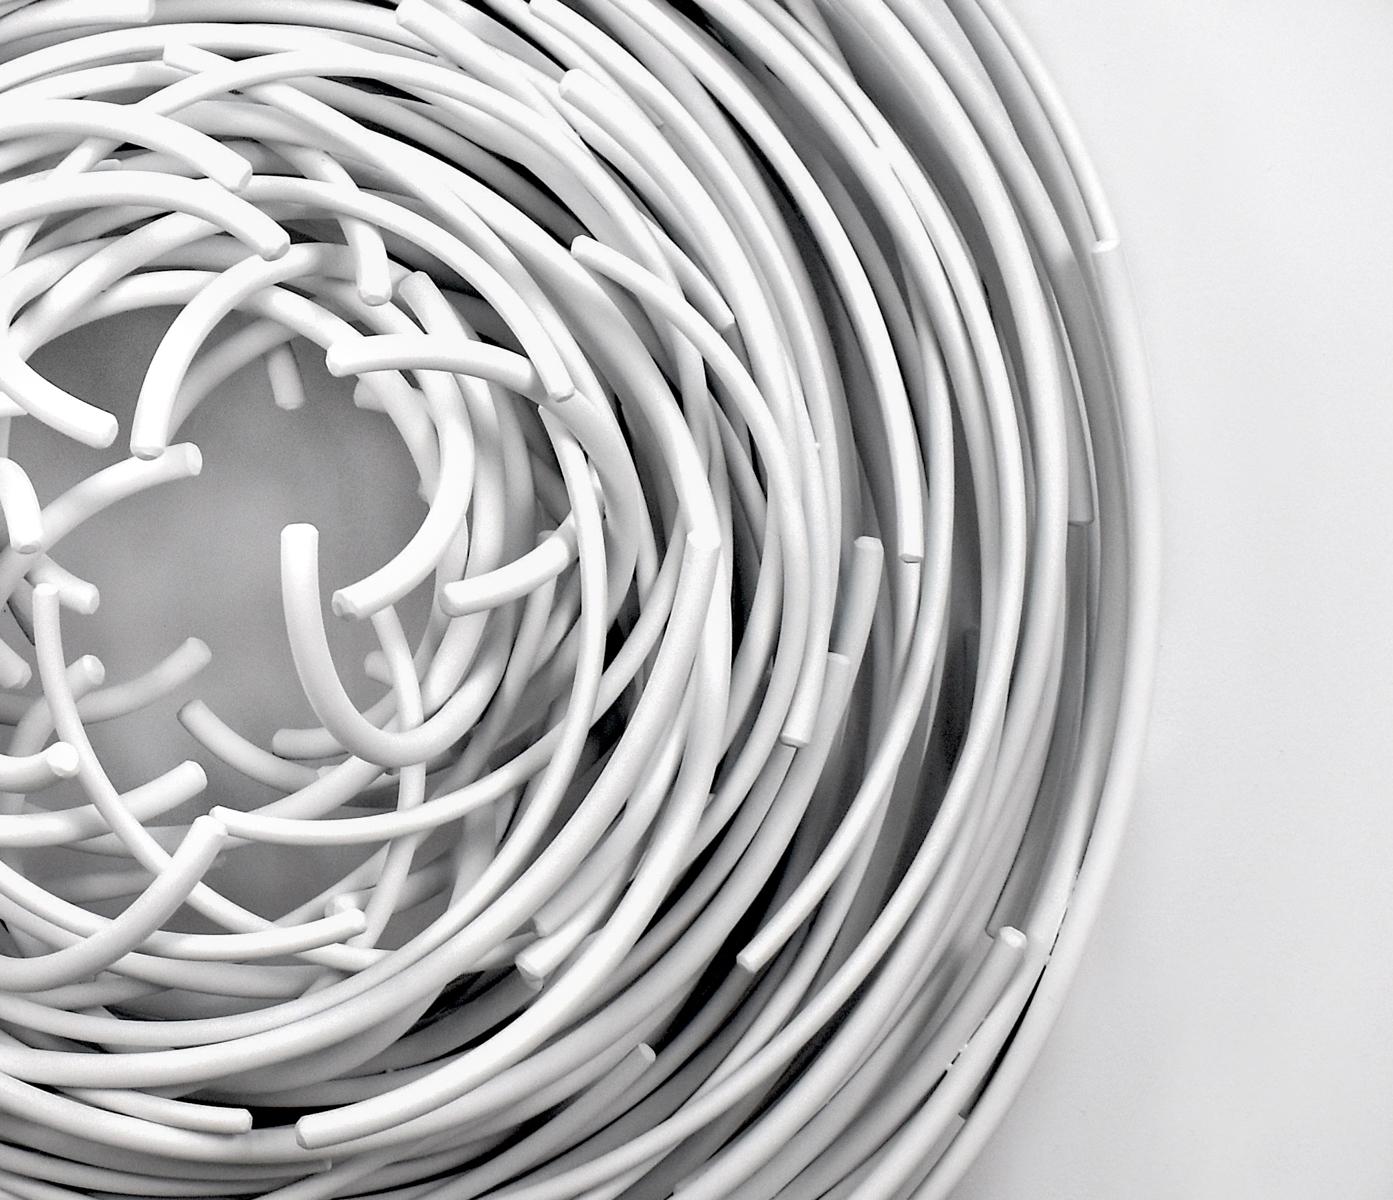 Beautiful chaos—The new sculptural series by Shayne Dark is named after the powerful image of a maelstrom—a whirlpool in a sea or river. Hand forged from round aluminum rods and painted a bright white; each rod appears to be woven into a circular